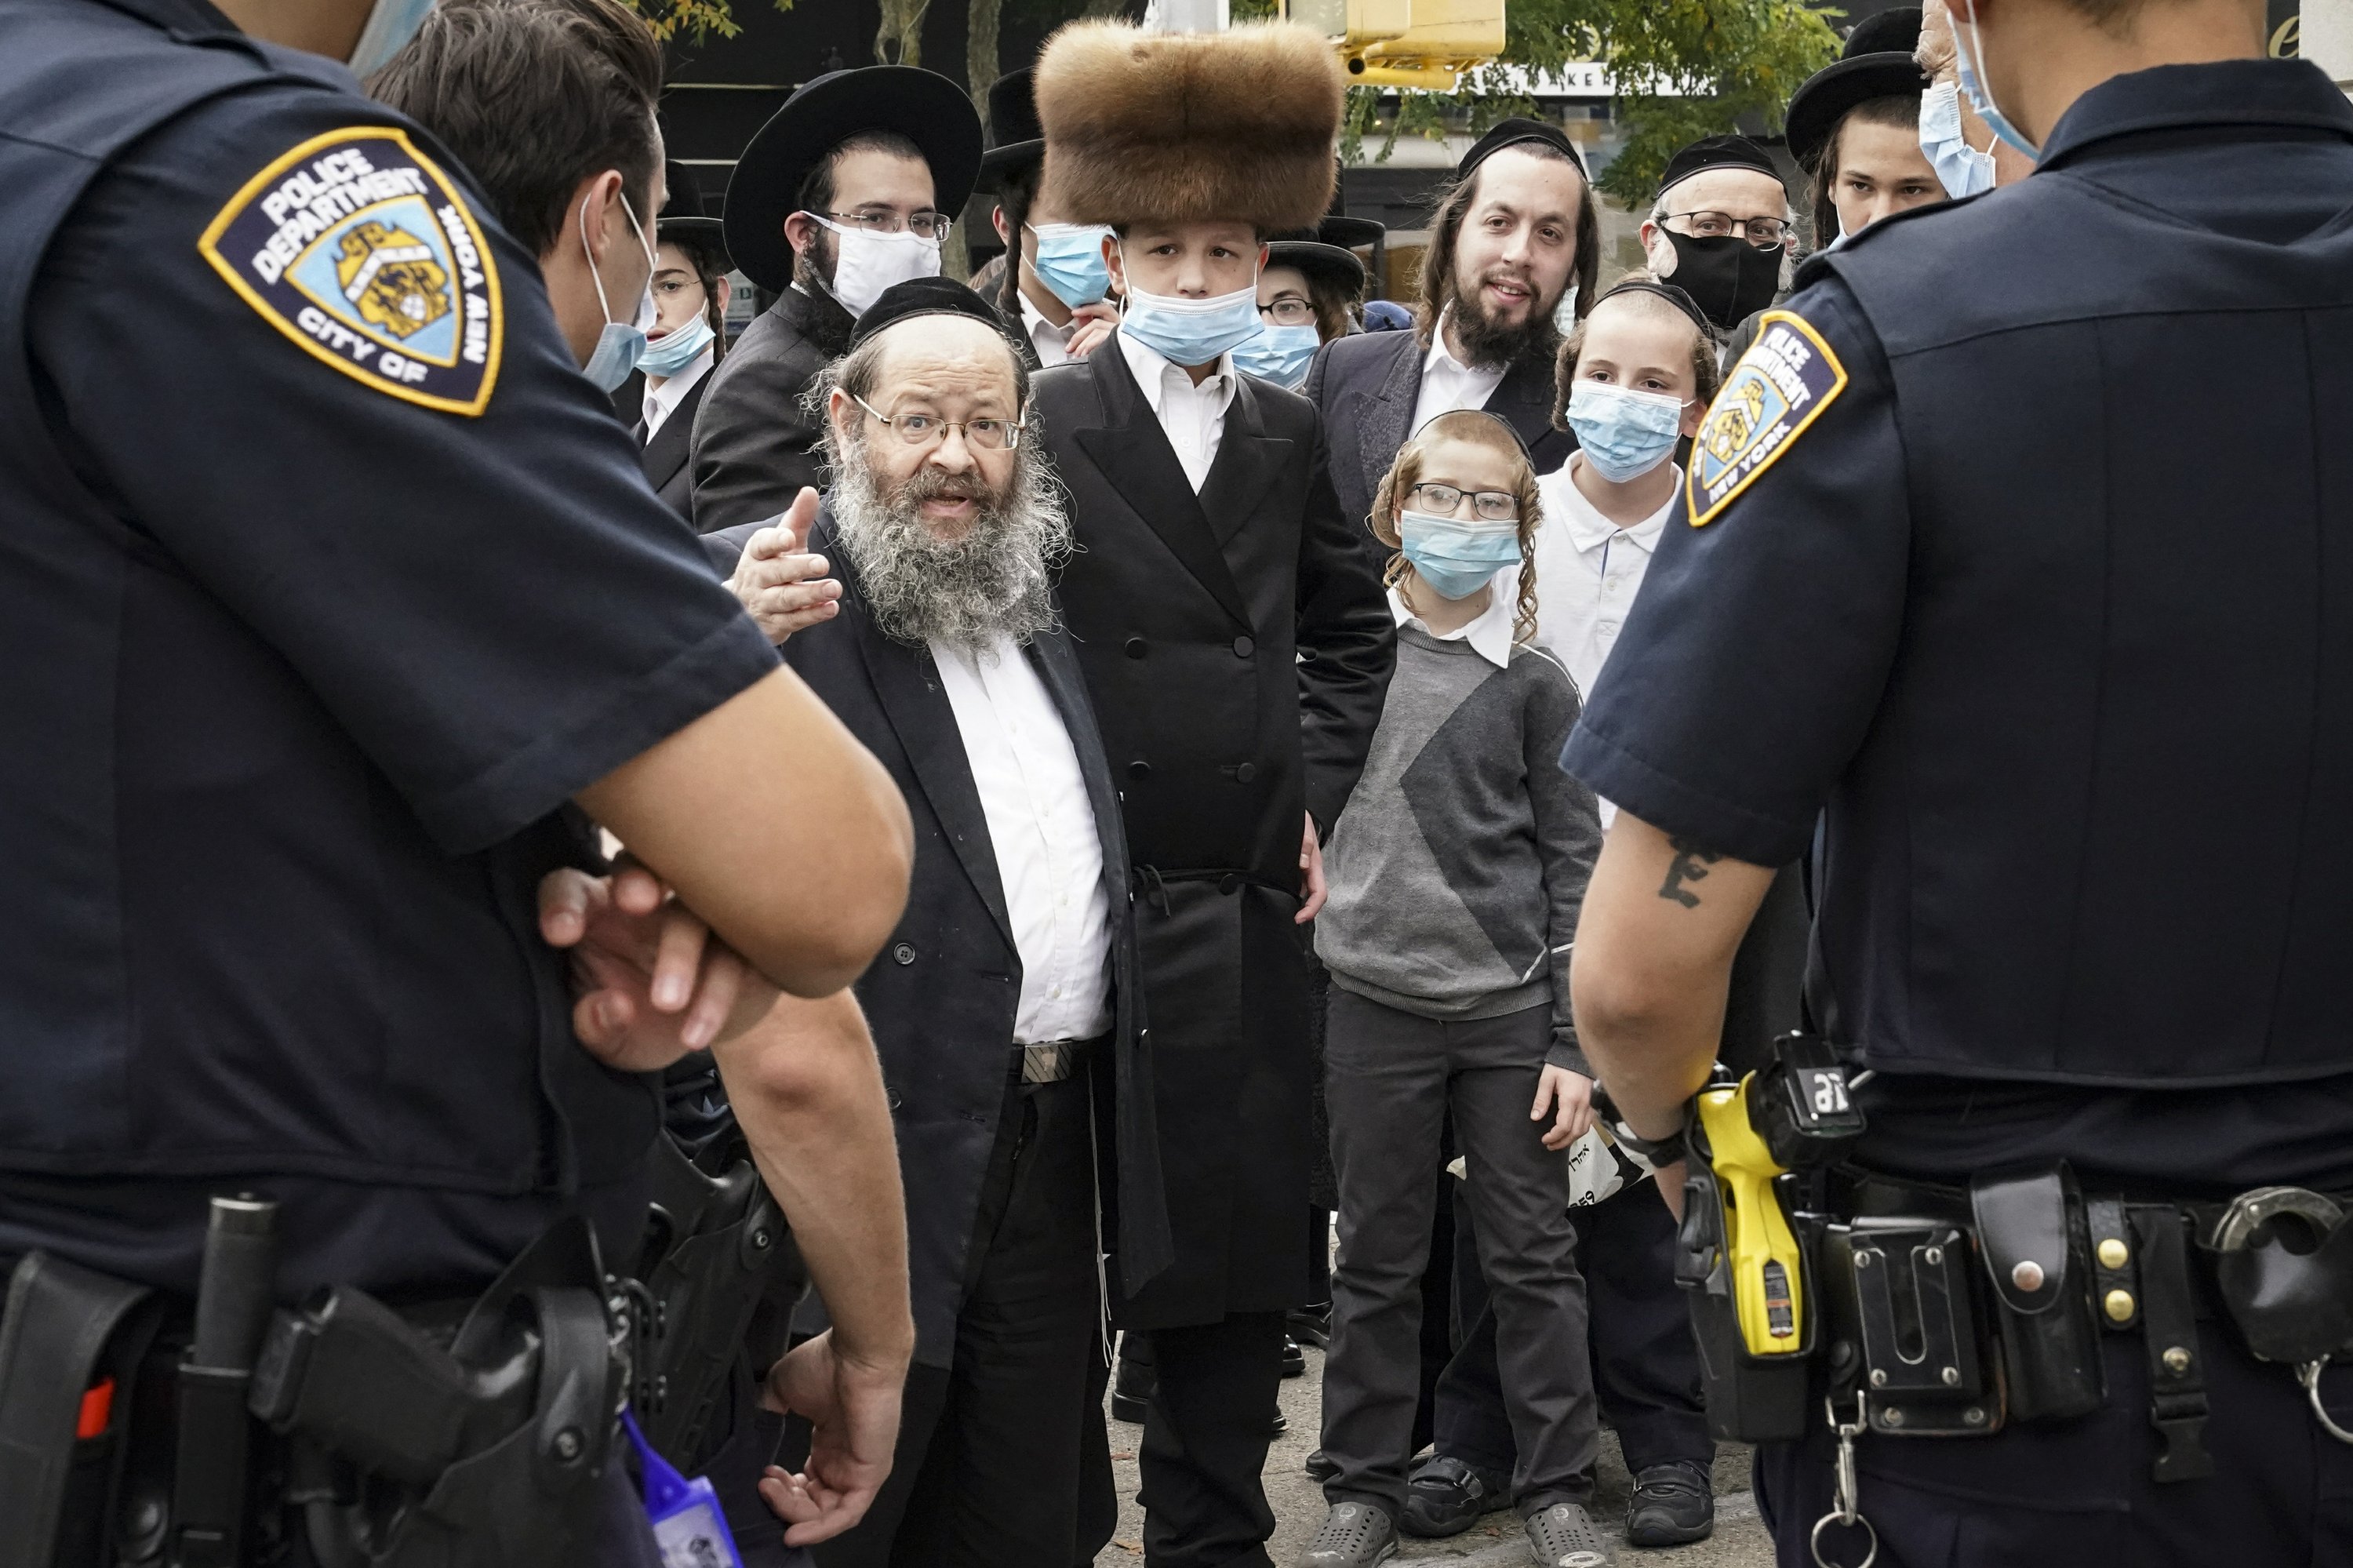 court-allows-ny-virus-restrictions-ahead-of-jewish-holidays